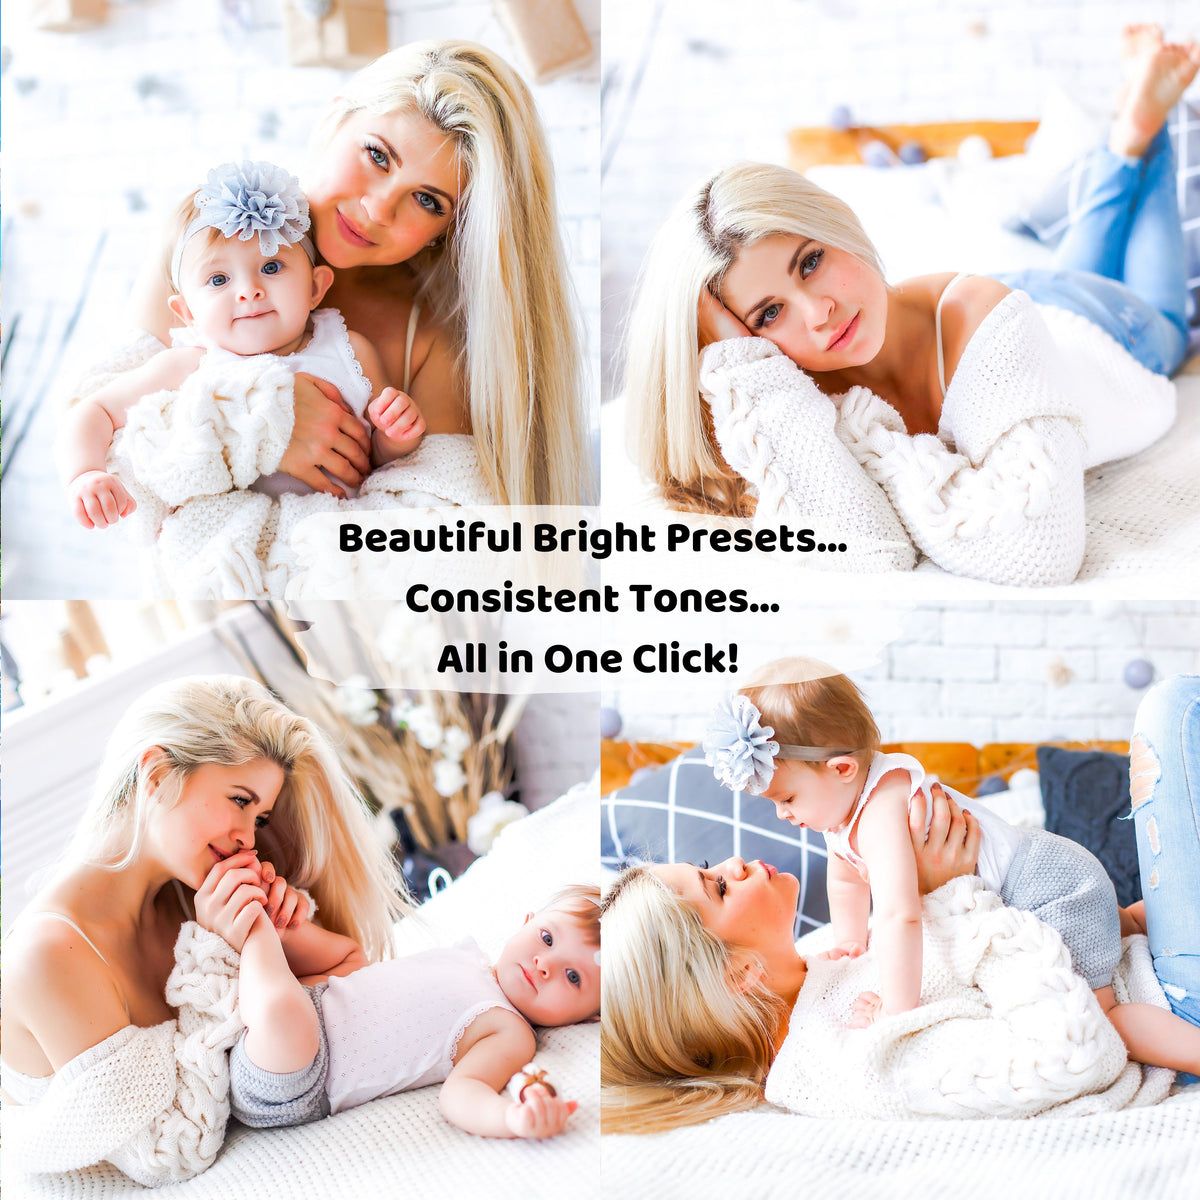 Lightroom Presets Baby and Mother. Light and Airy Presets for Mobile